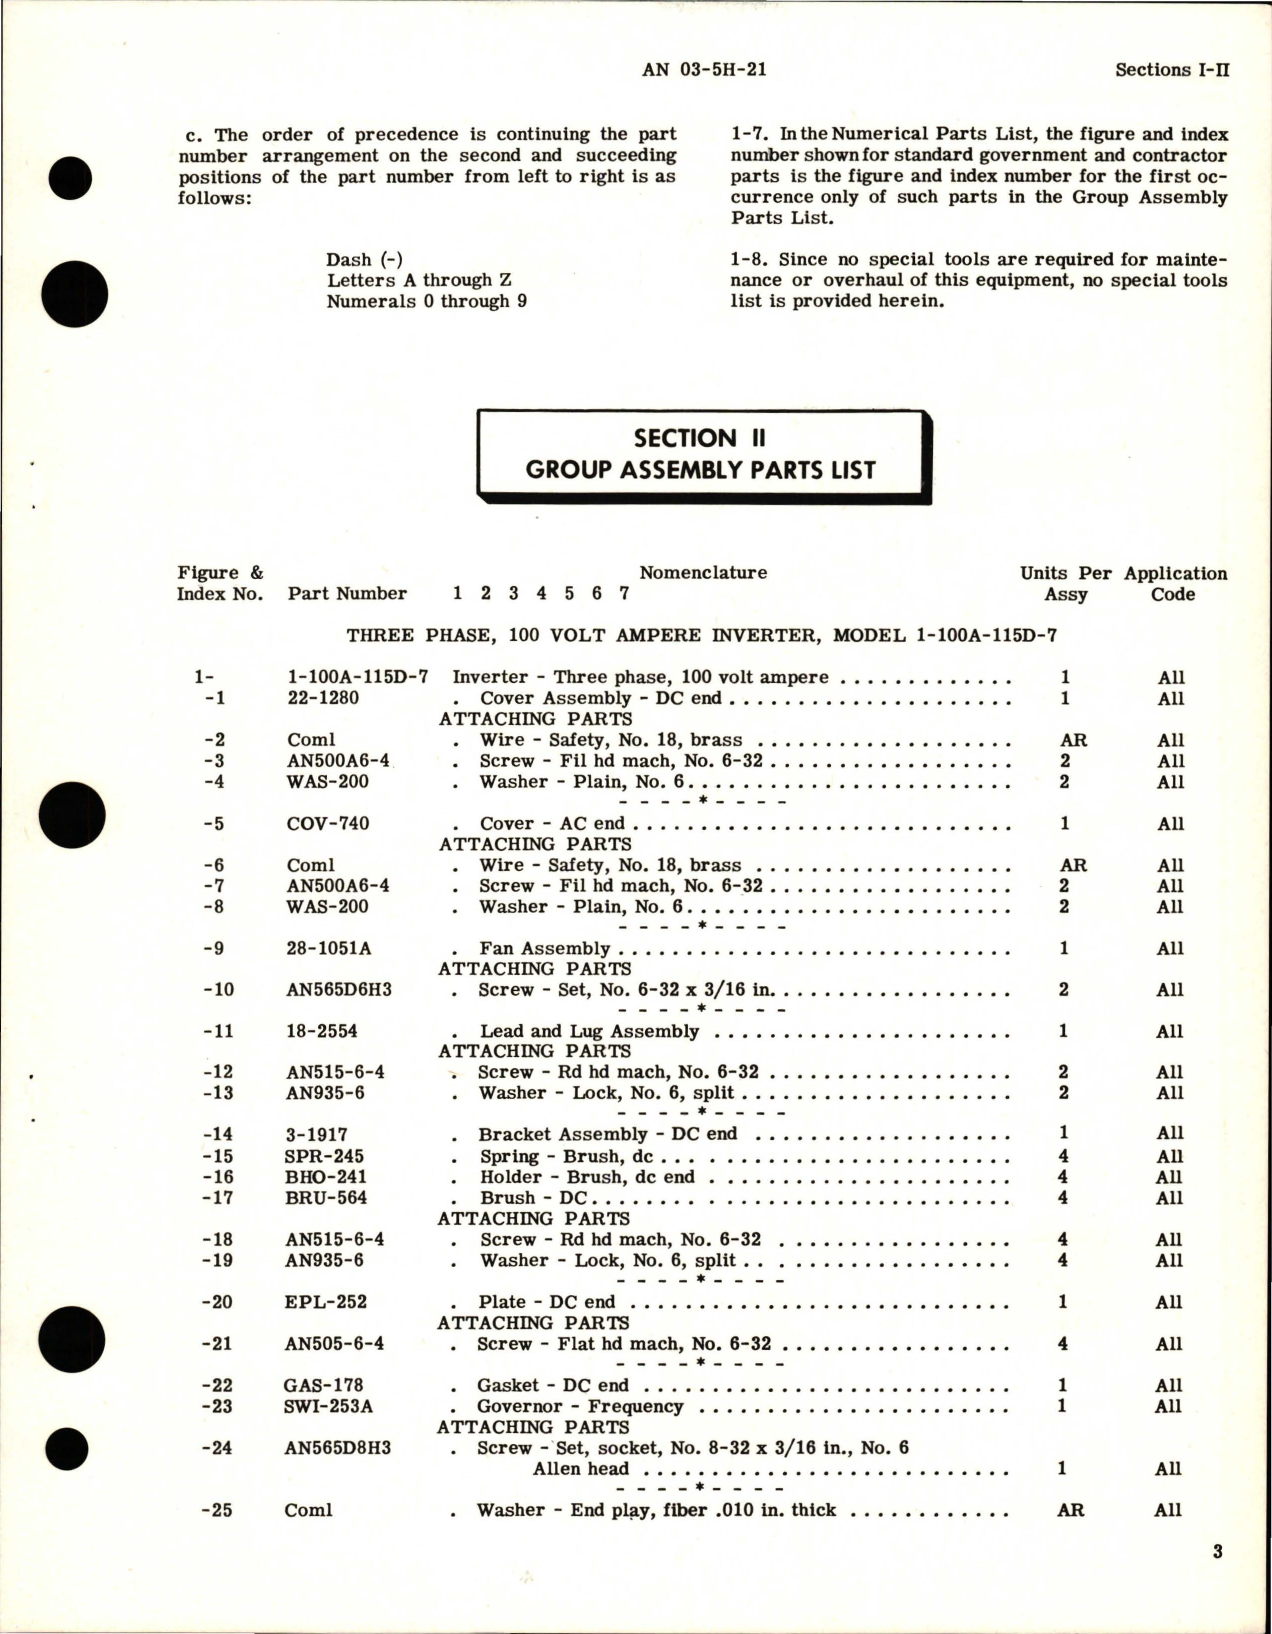 Sample page 5 from AirCorps Library document: Parts Catalog for Inverter - 100 VA - Models 1-100A-115D, 1-100A-115D-7, and 1-100A-115D-6